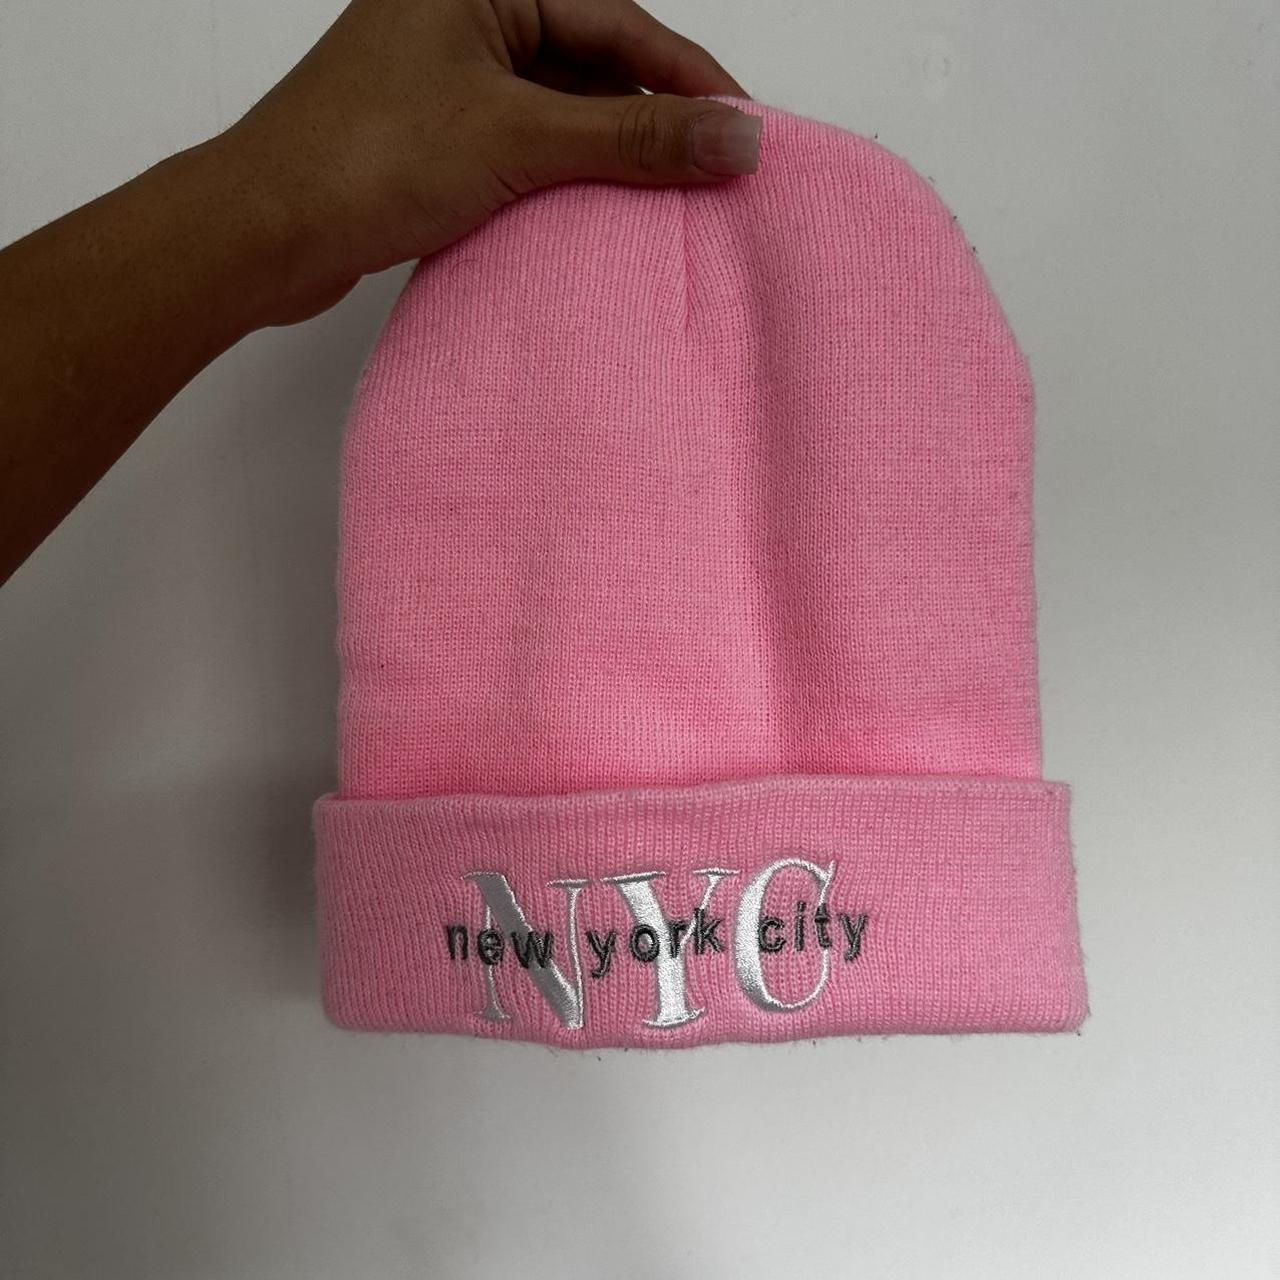 NYC Embroidered Beanie Hat Classic Unisex Stretch - Depop